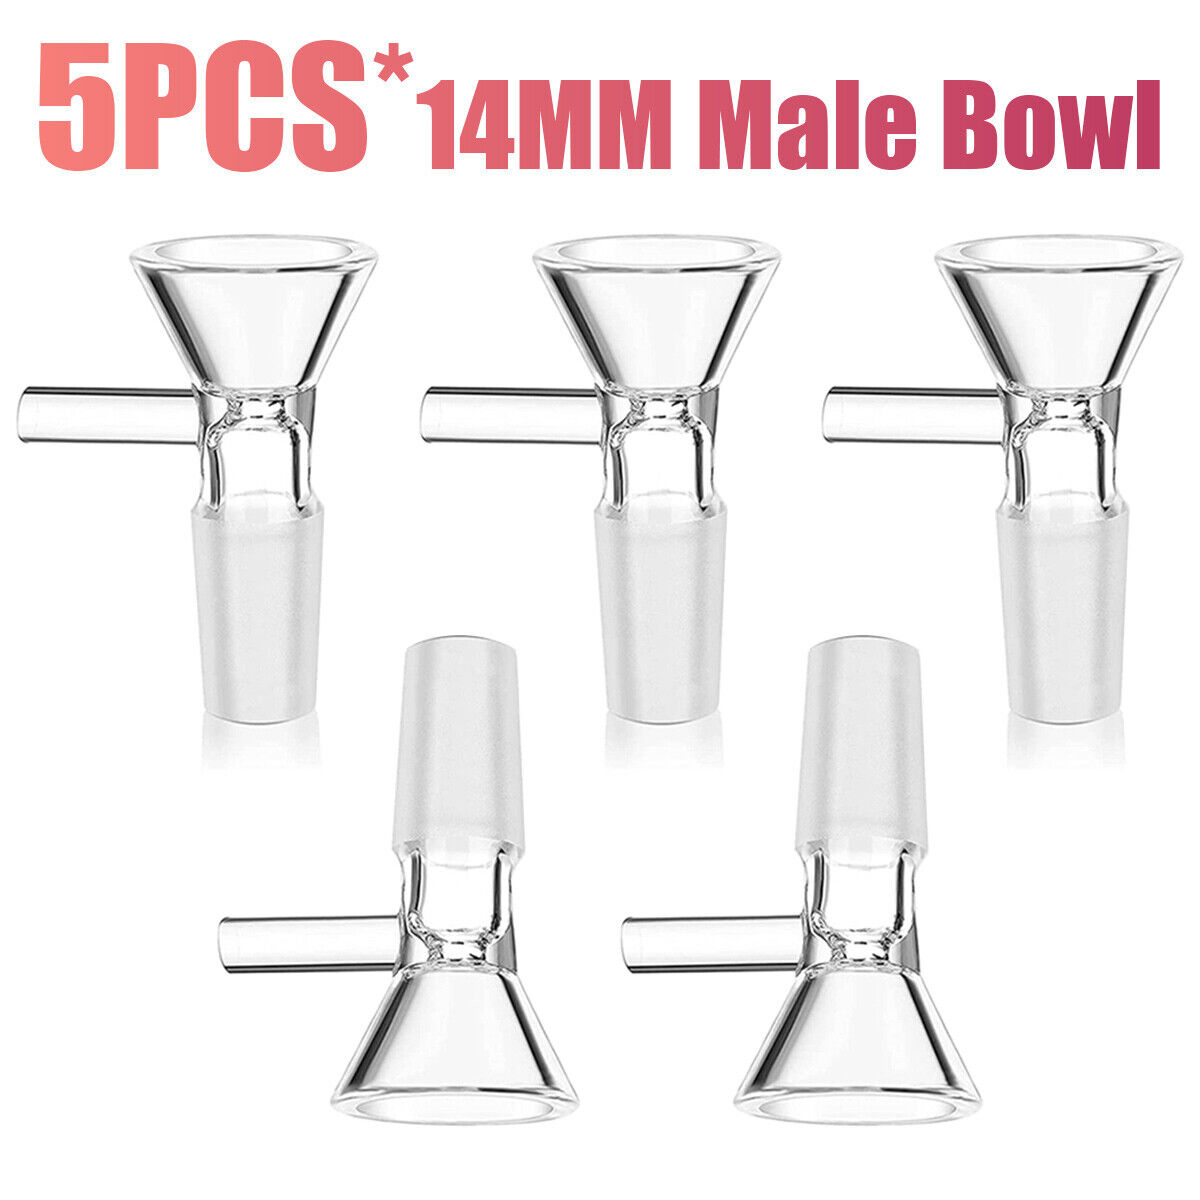 5x 14MM Male Glass Bowl For Water Pipe Hookah Bong Replacement Head